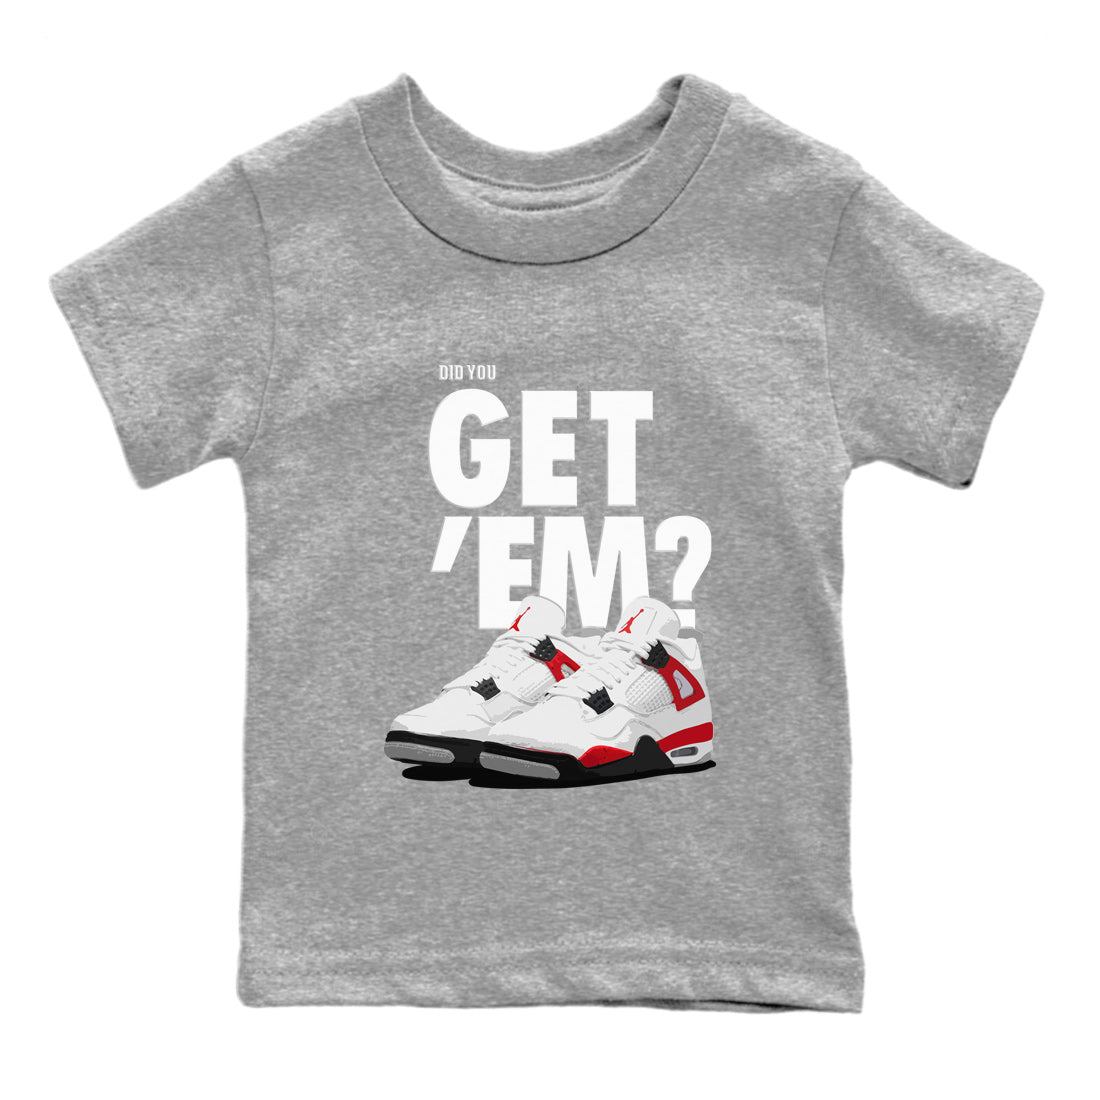 Jordan 4 Red Cement Tees Outfits Did You Get 'Em SNRT Sneaker Tees Air Jordan 4 Red Cement SNRT Sneaker Release Tees Kids Shirts To Match Jordan Heather Grey 2